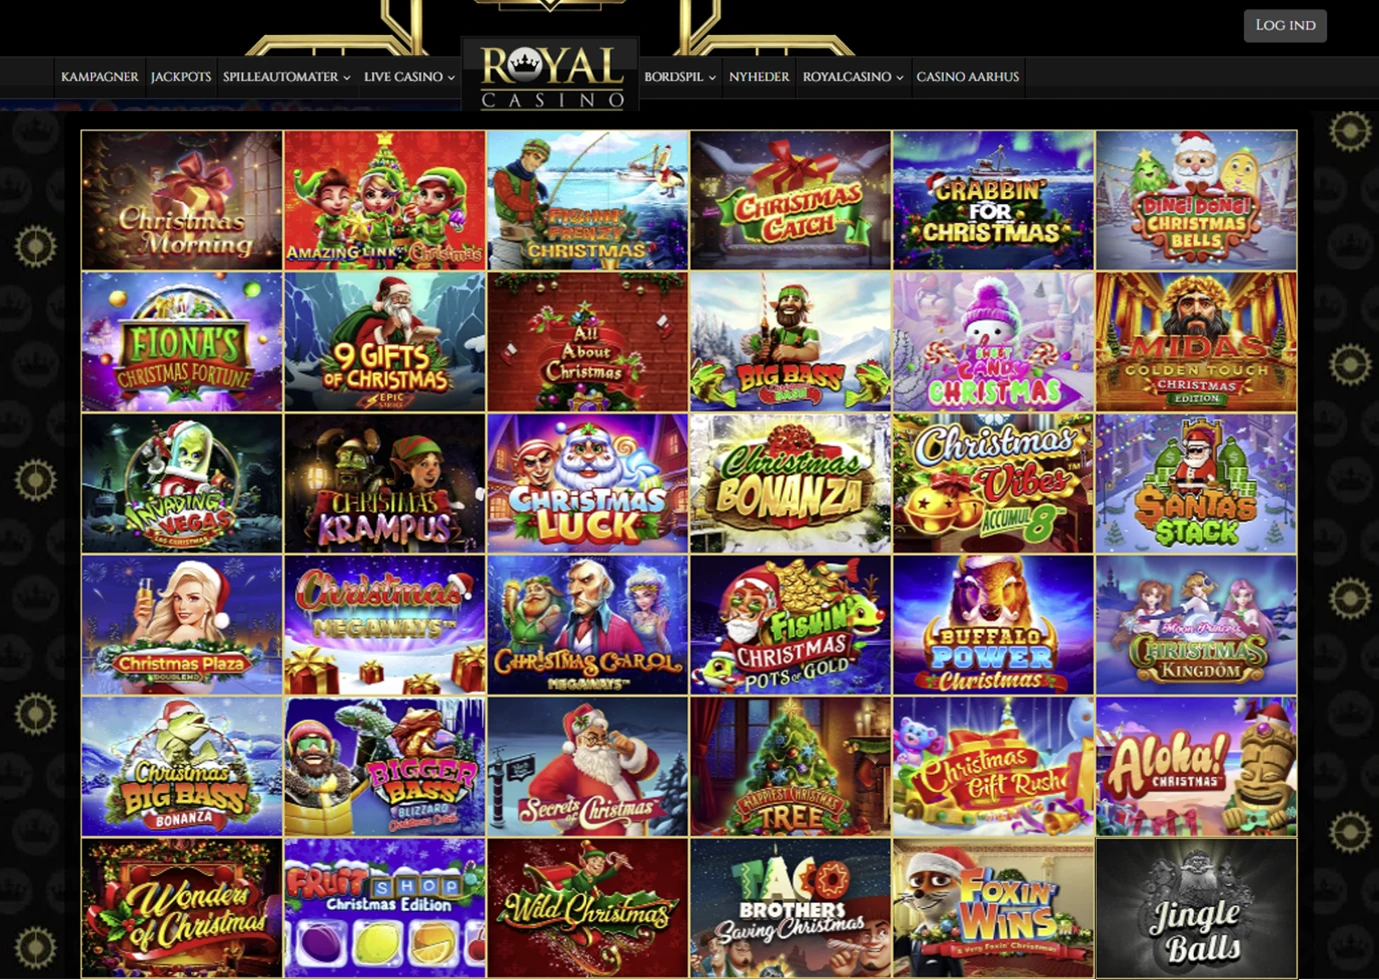 Las Vegas Royale, Strategy Games, Games, Products